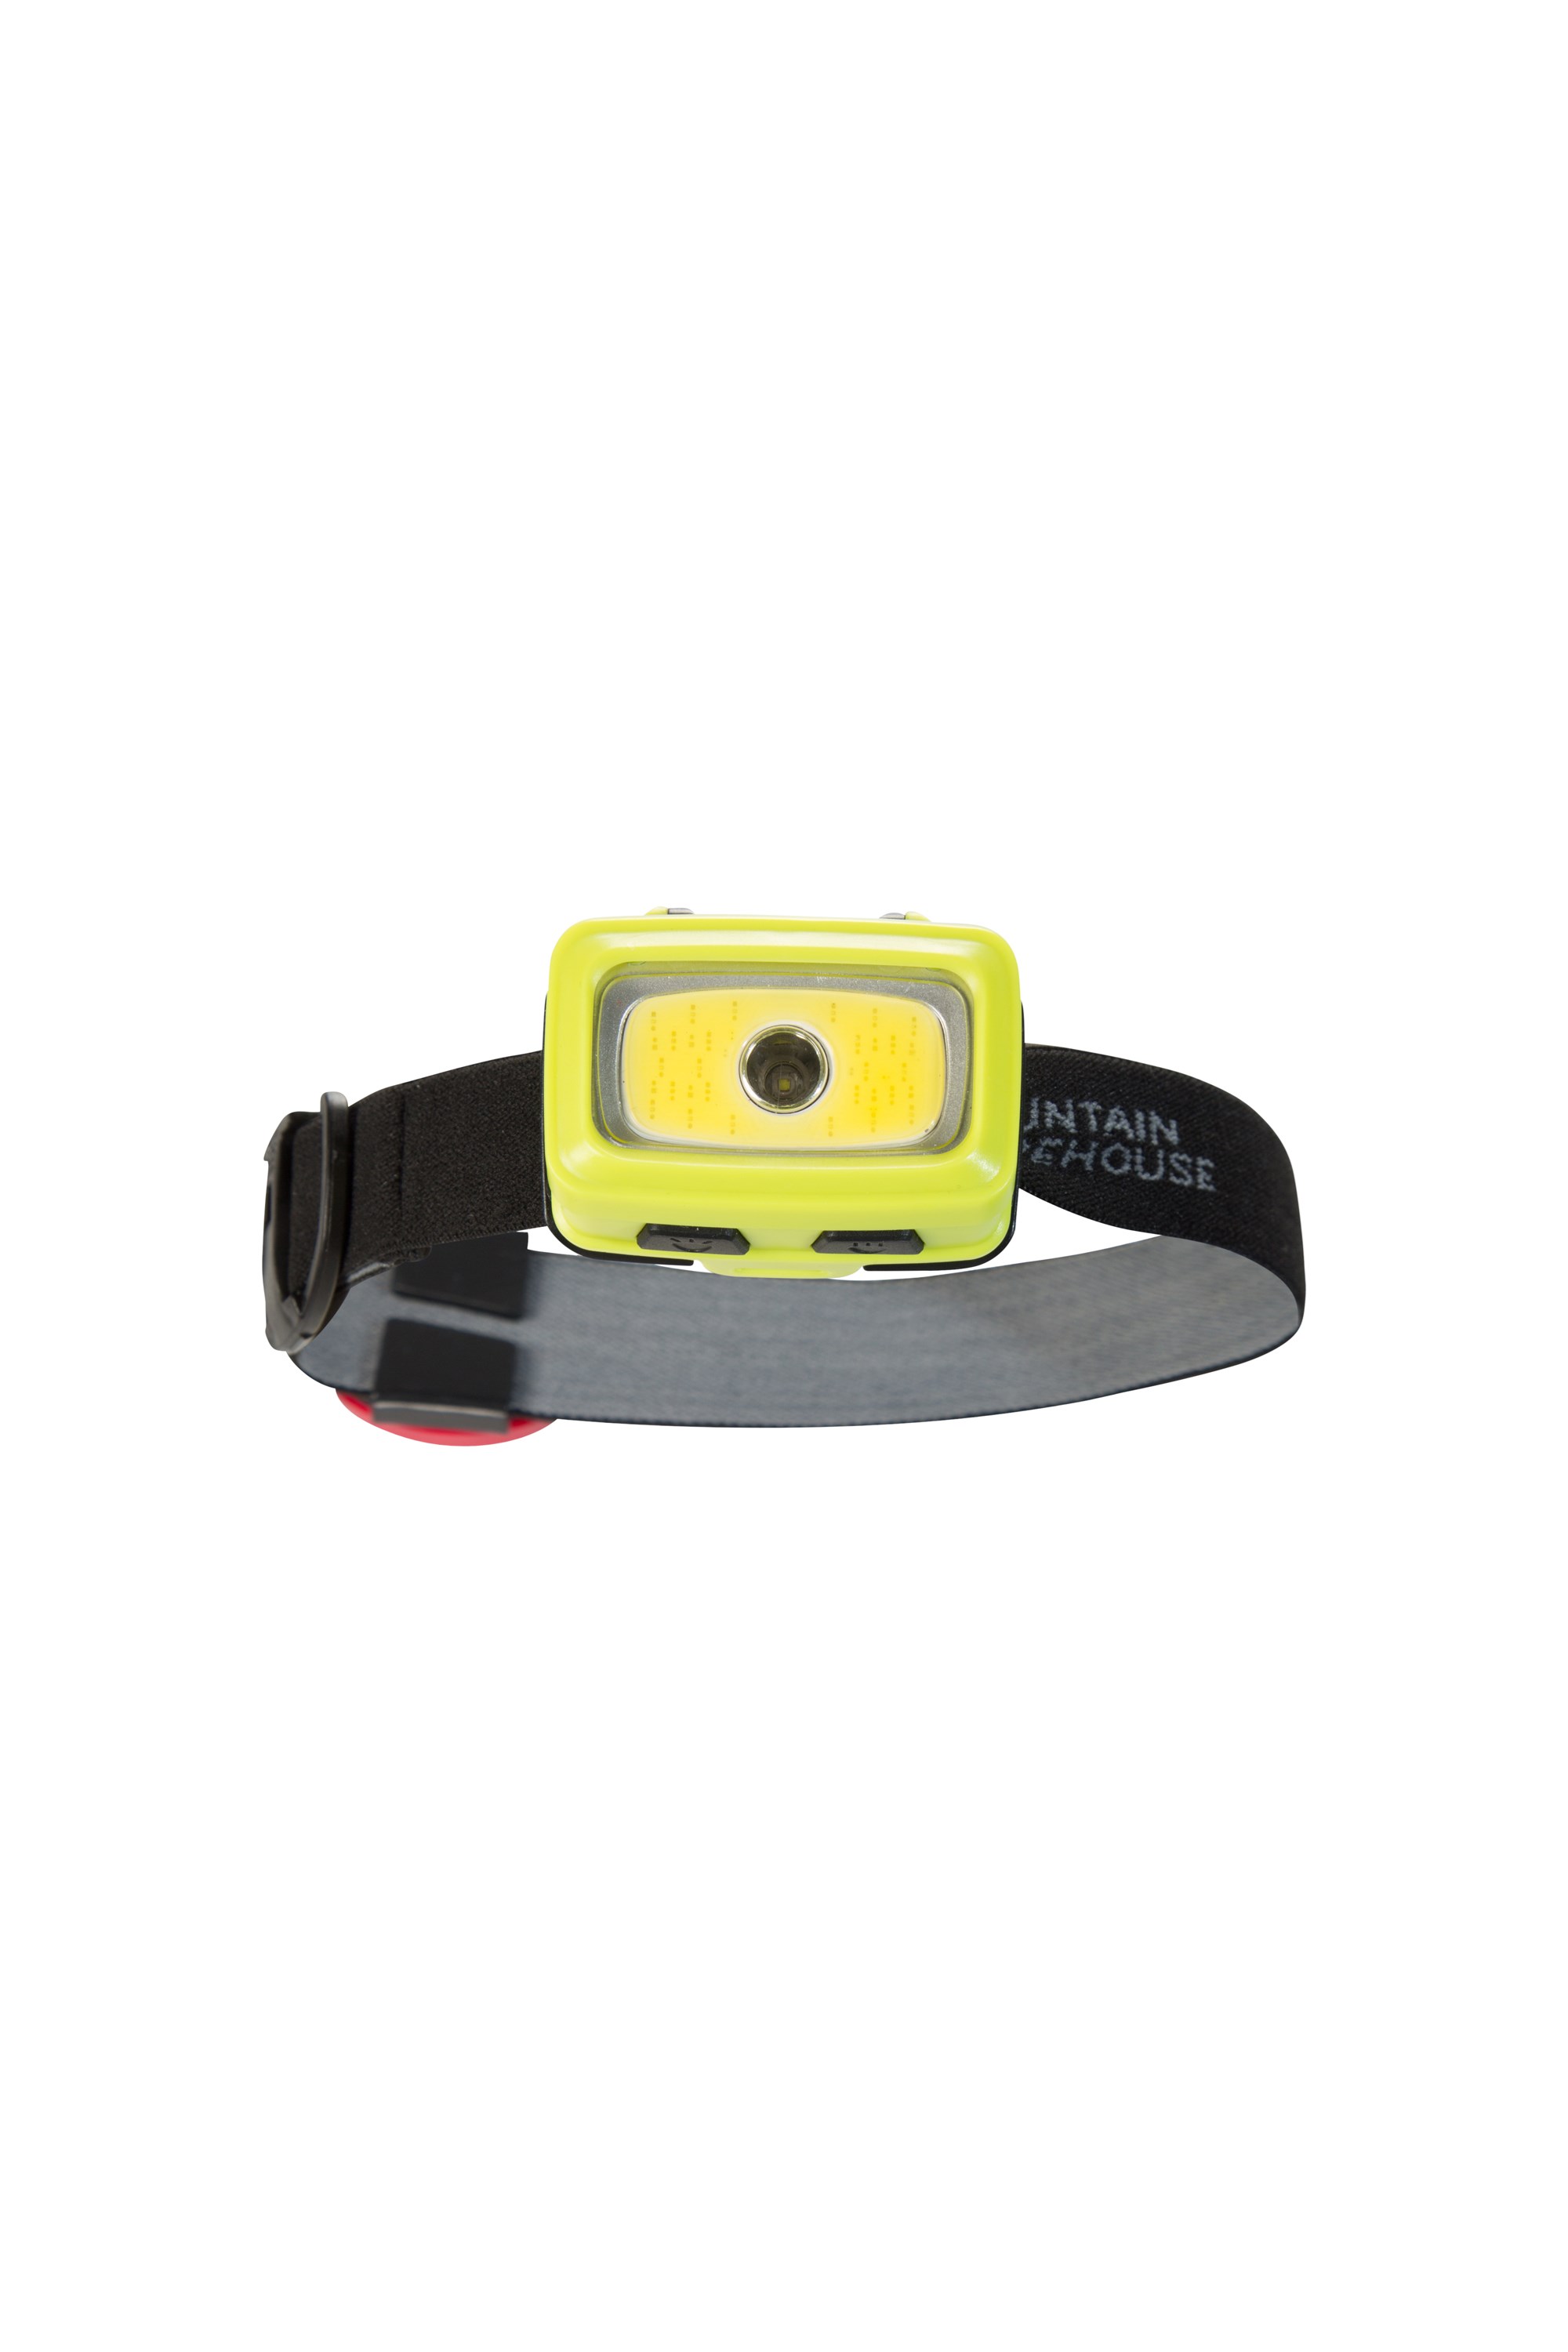 NEW! Mountain Warehouse Extreme Red & White Head Torch USB 